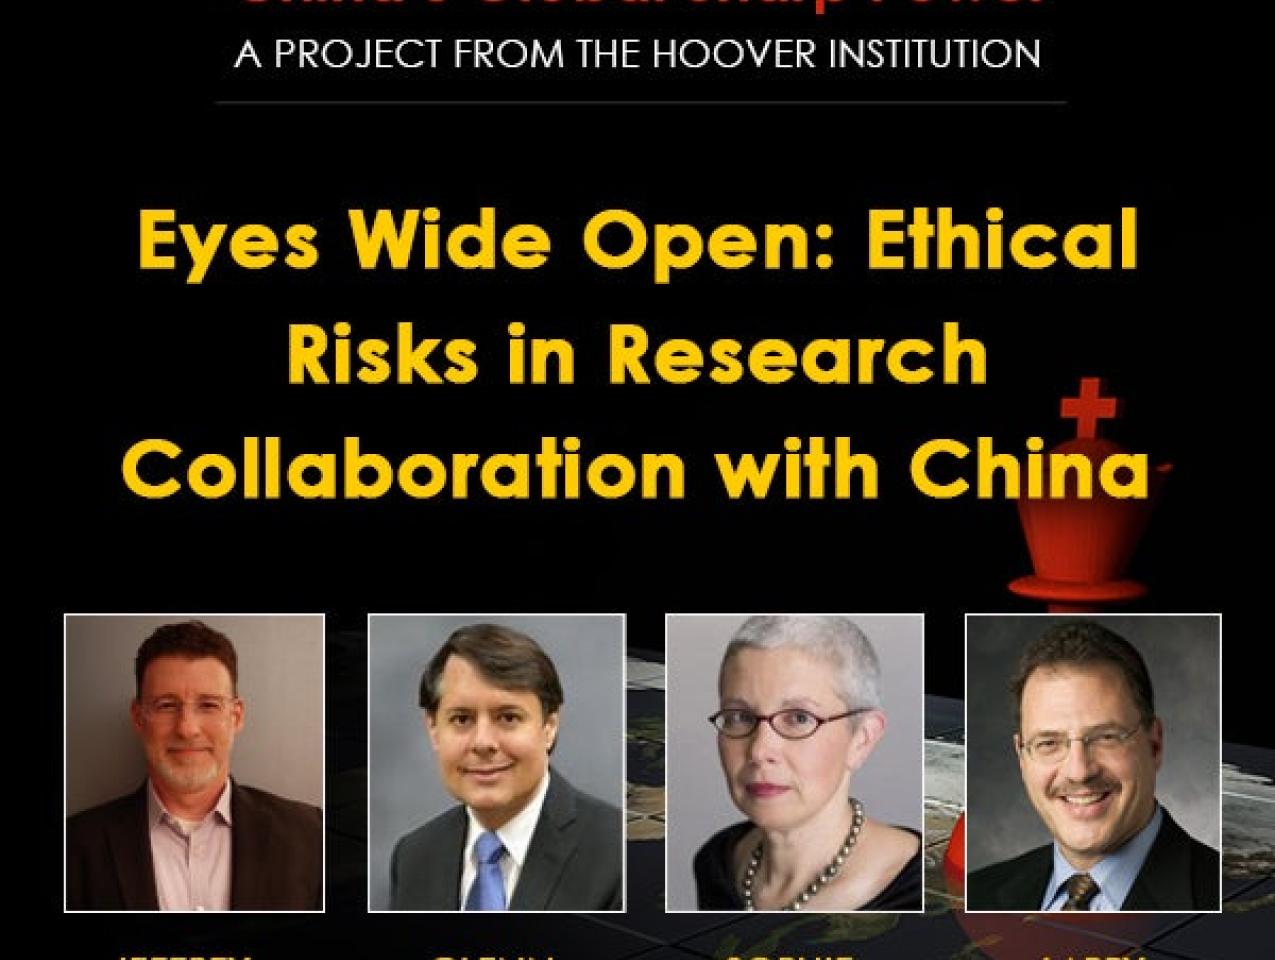 Image for Eyes Wide Open: Ethical Risks In Research Collaboration With China